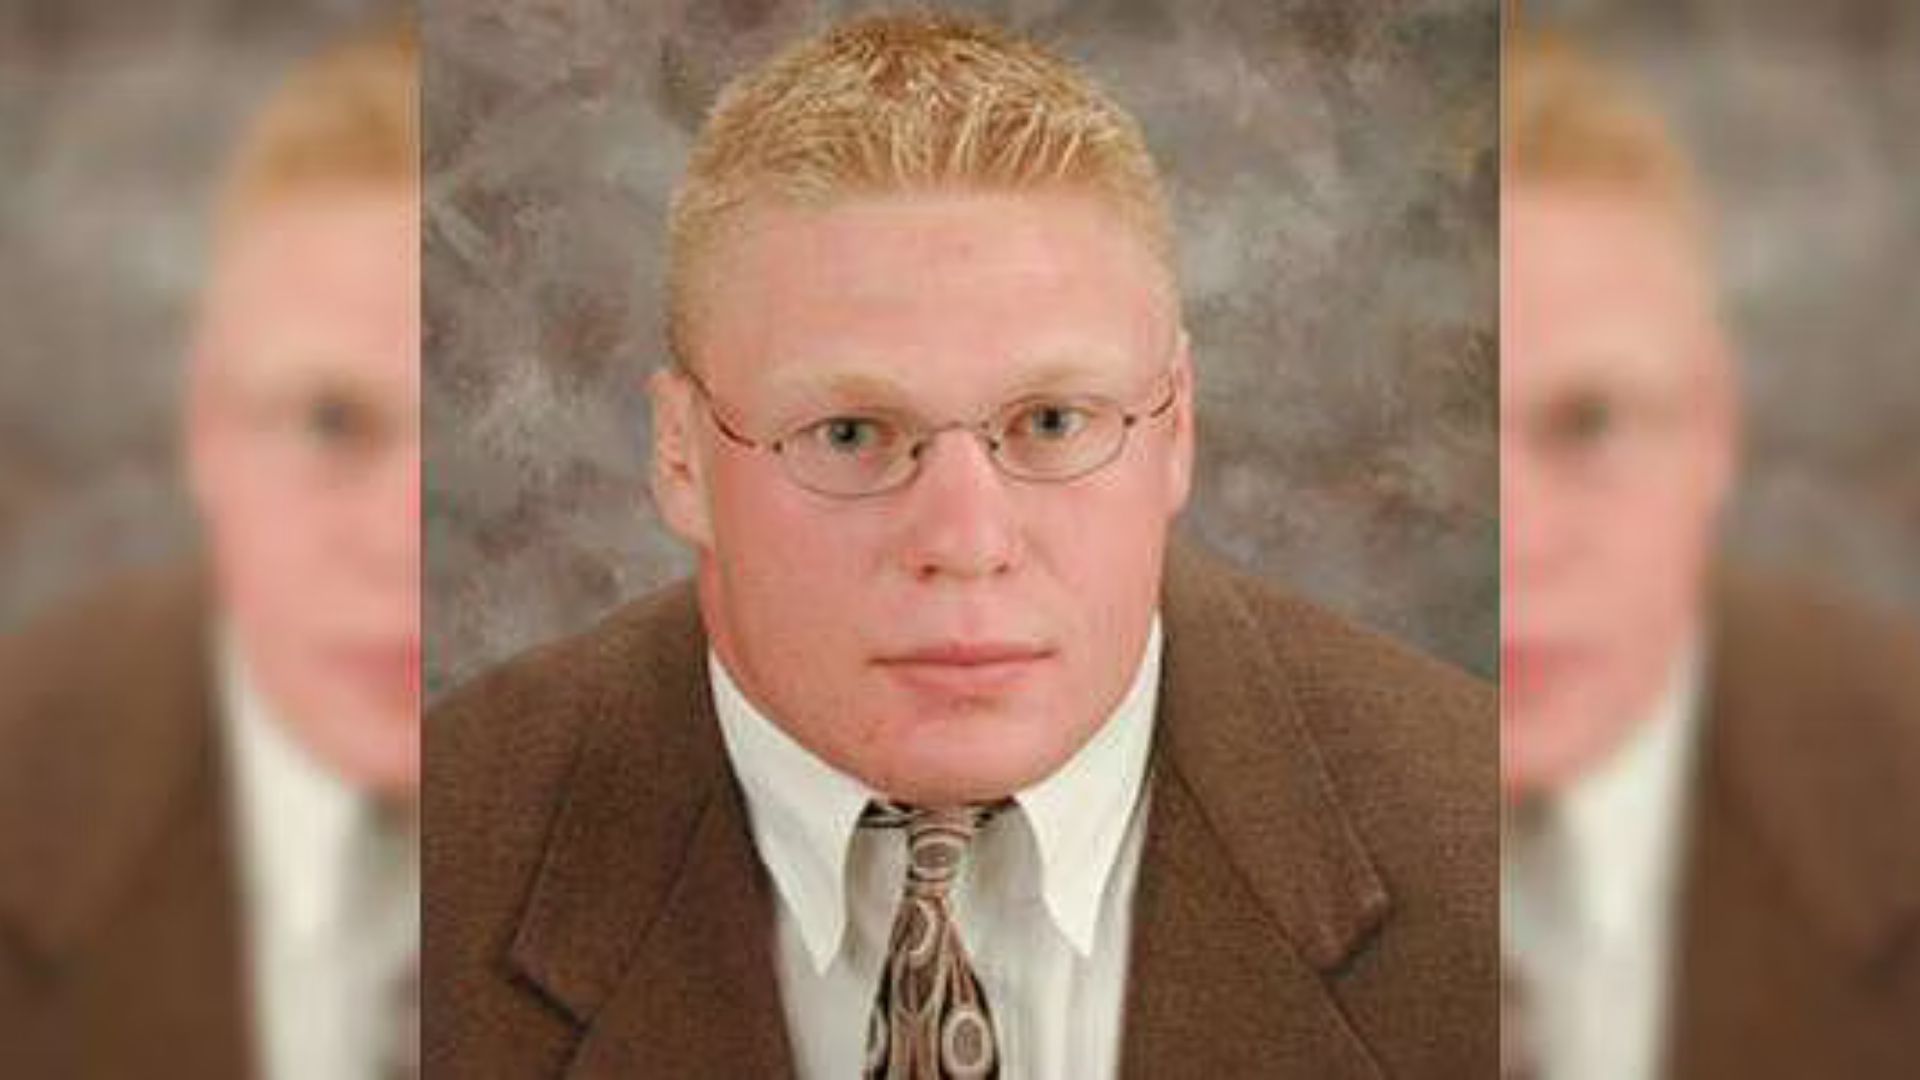 The famous image of Brock Lesnar that turned into a meme